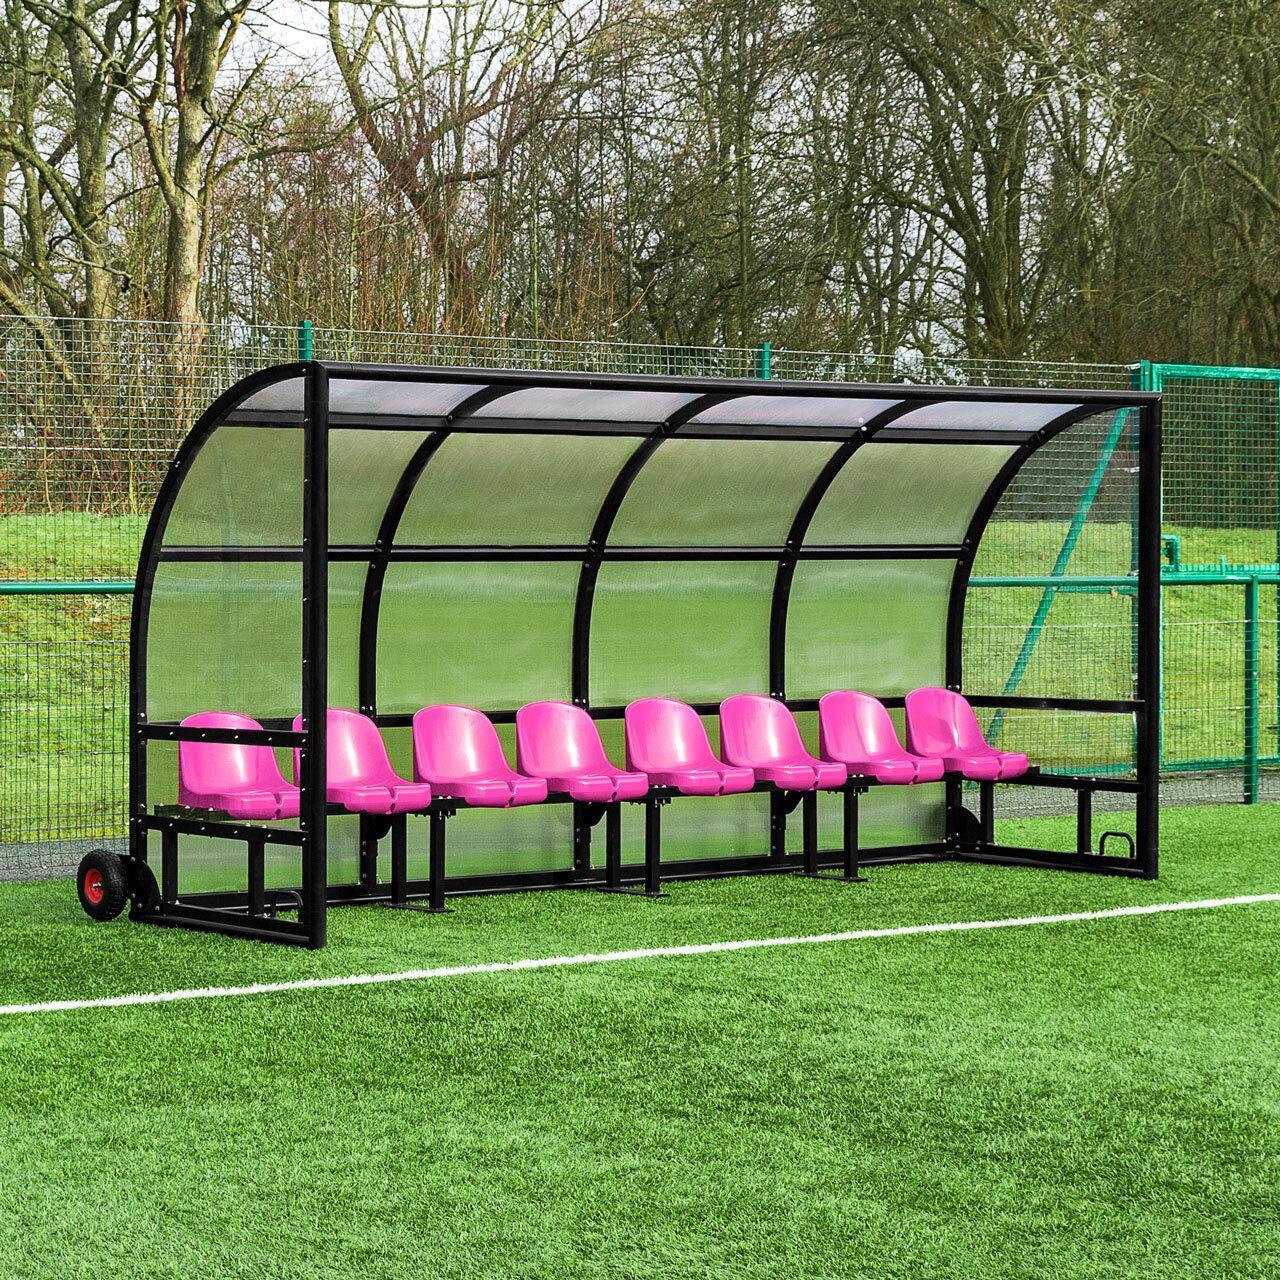 FORZA Alu60 Team Shelters [2 - 12 Seats] [Colour: Pink] [Shelter Length & Seats:: 6m Shelter | 12 Seats] [Wheel Options:: With Wheels]